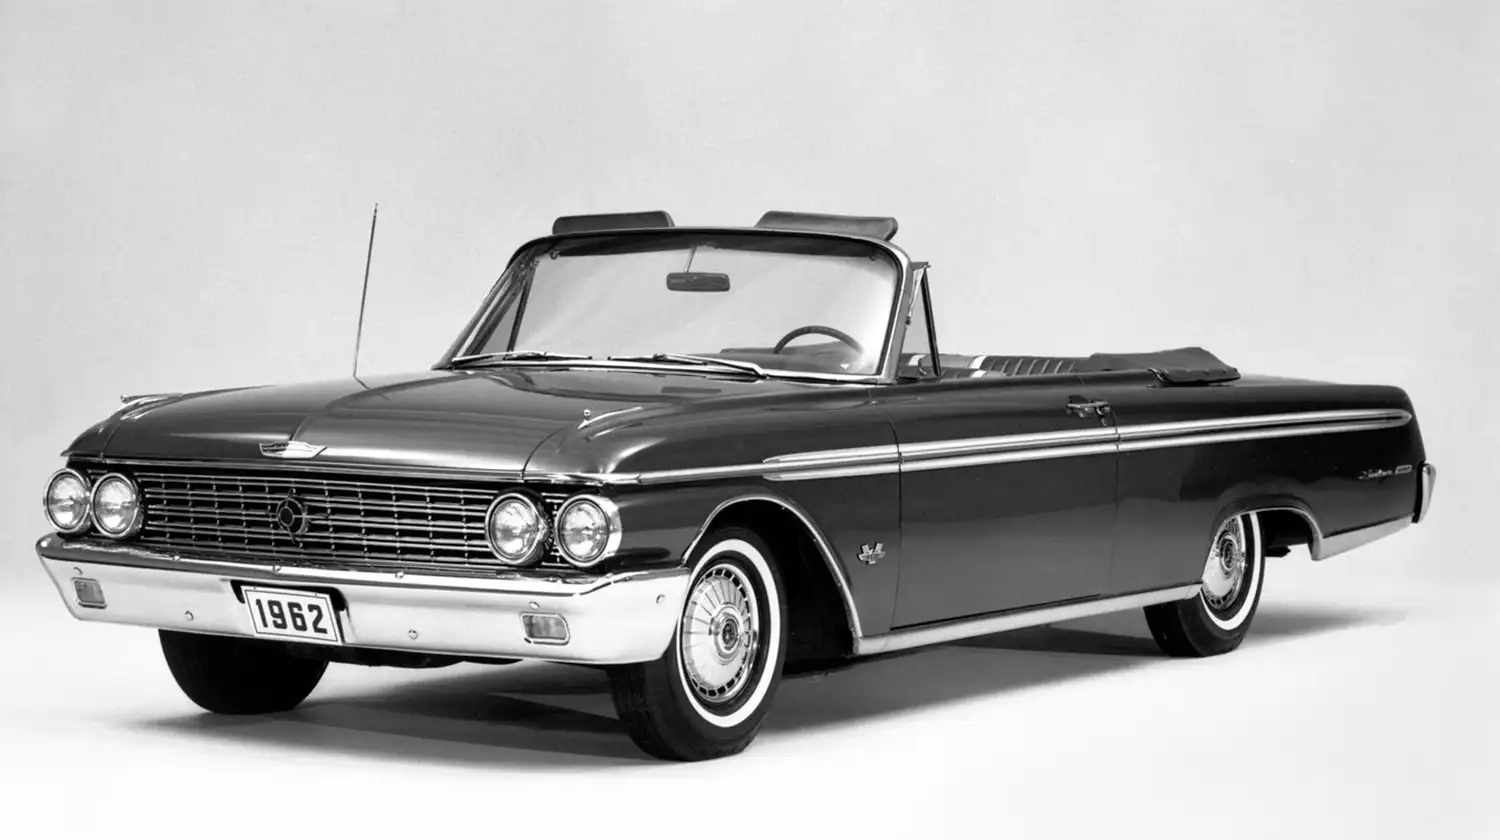 1962 Ford Galaxie 500 Sunliner Convertible: An Icon of Classic American Style